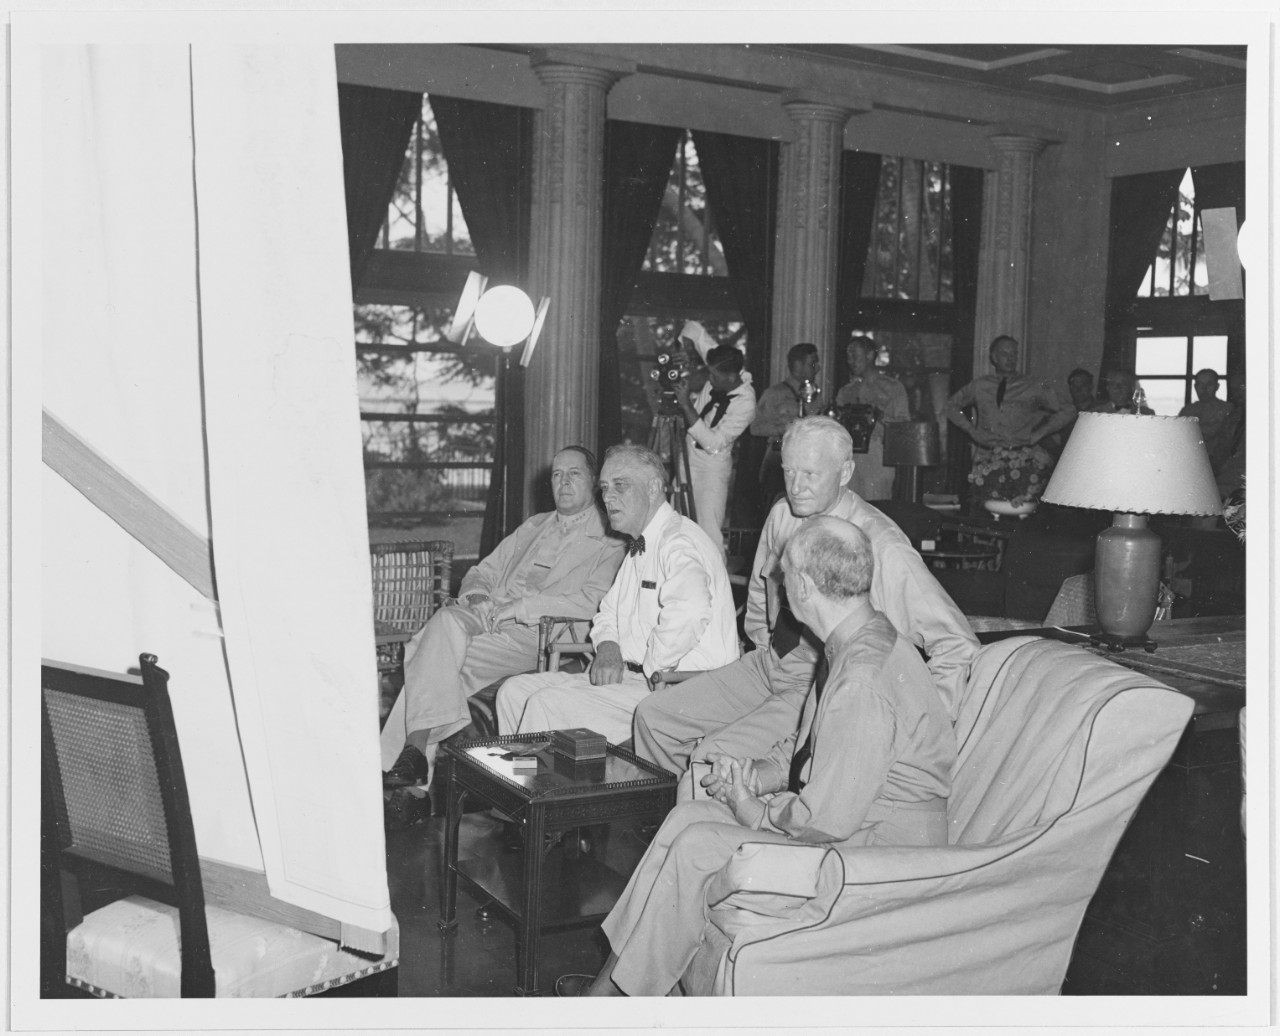 General Douglas MacArthur, President Franklin D. Roosevelt, Admiral Chester W. Nimitz, and Admiral William D. Leahy